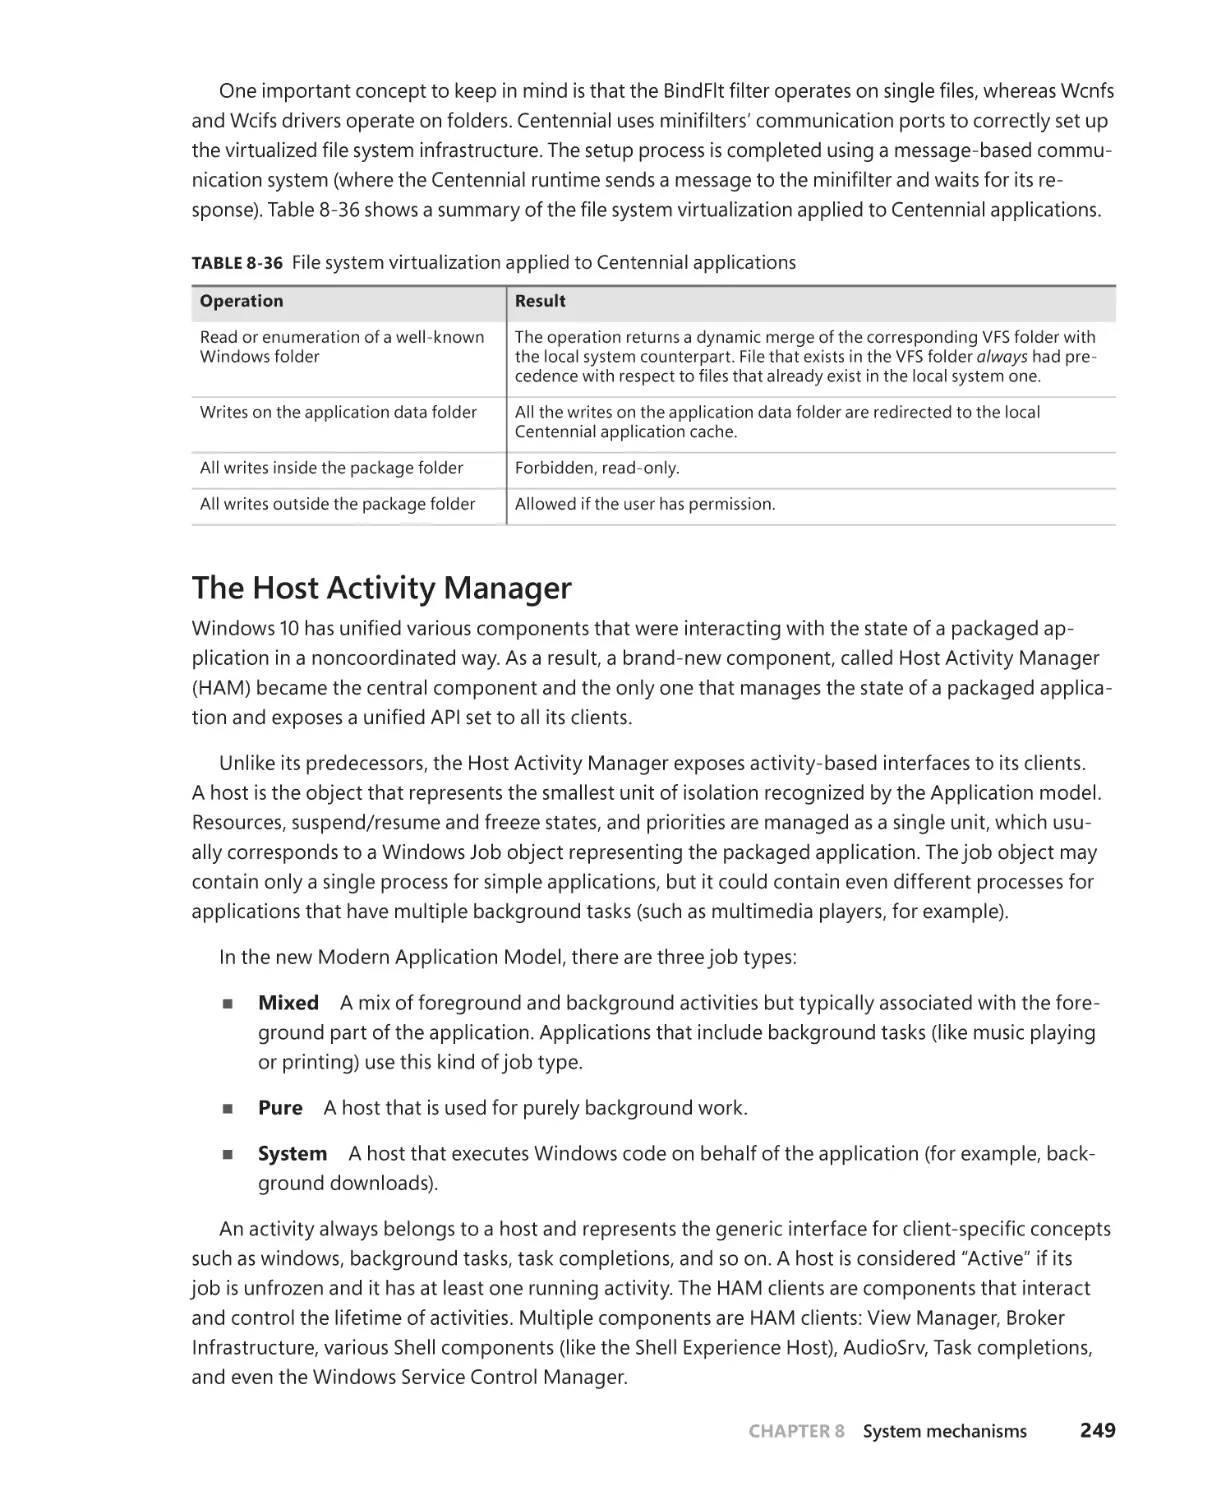 The Host Activity Manager